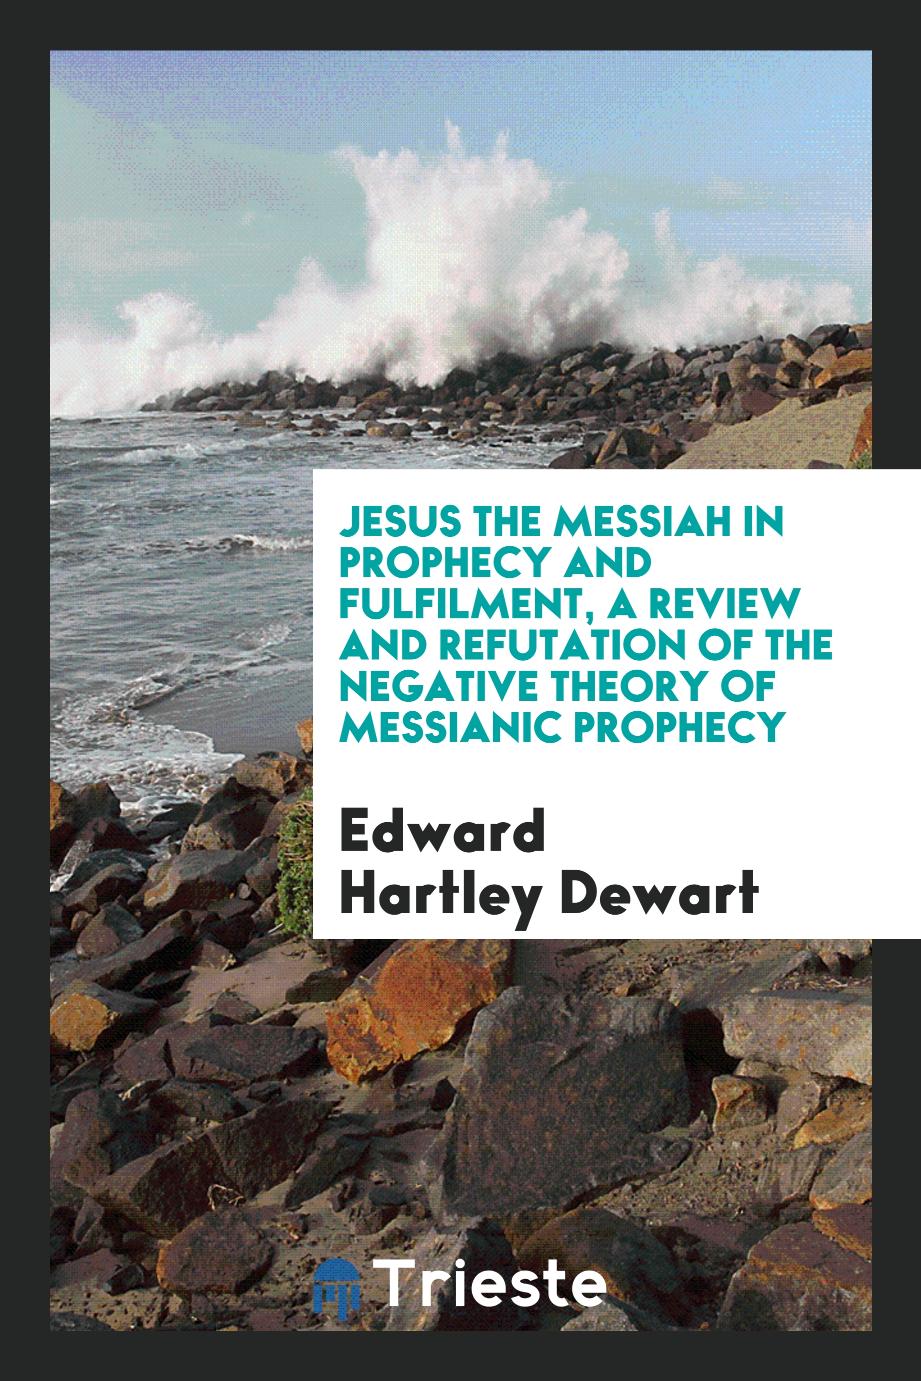 Jesus the Messiah in prophecy and fulfilment, a review and refutation of the negative theory of Messianic prophecy